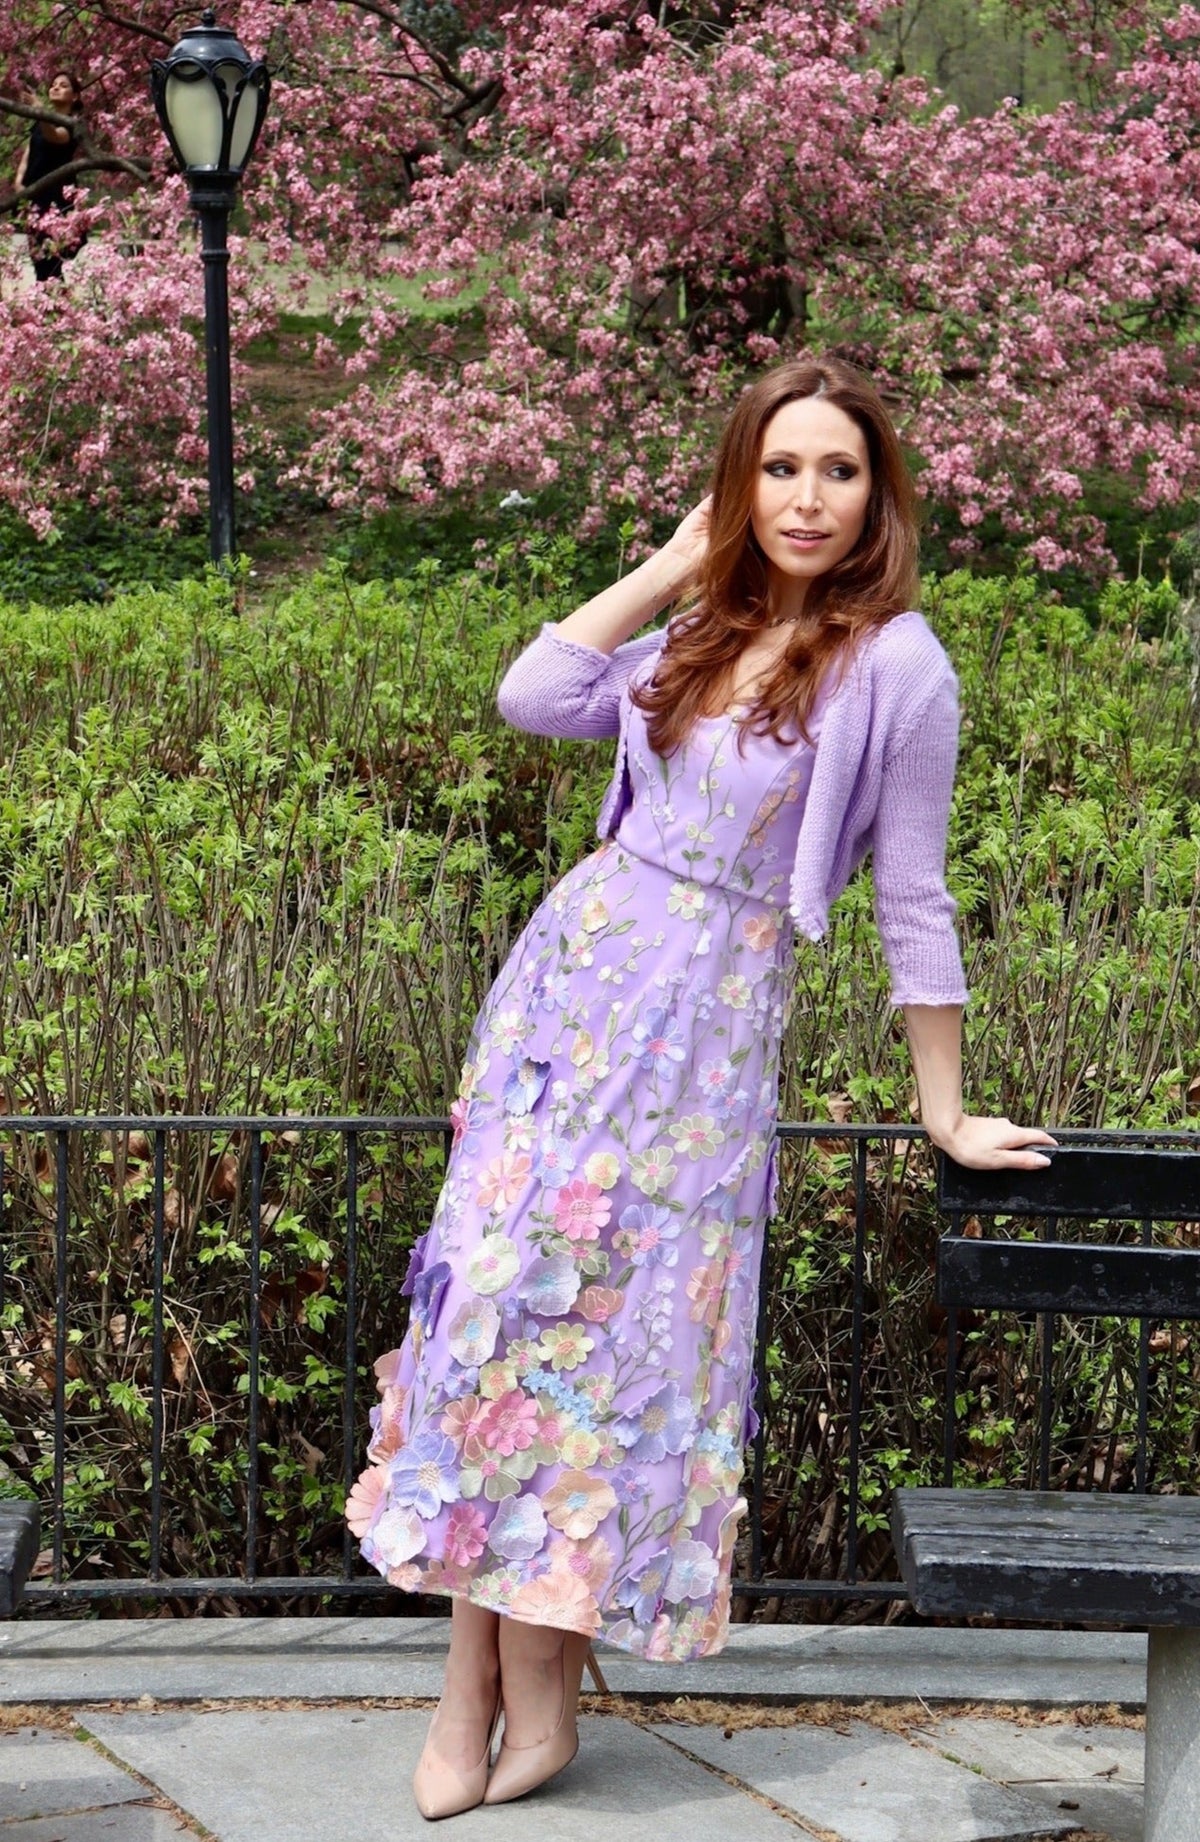 Model in long lilac midi length dress with floral applicqued details with a matching lilac cropped sweater.